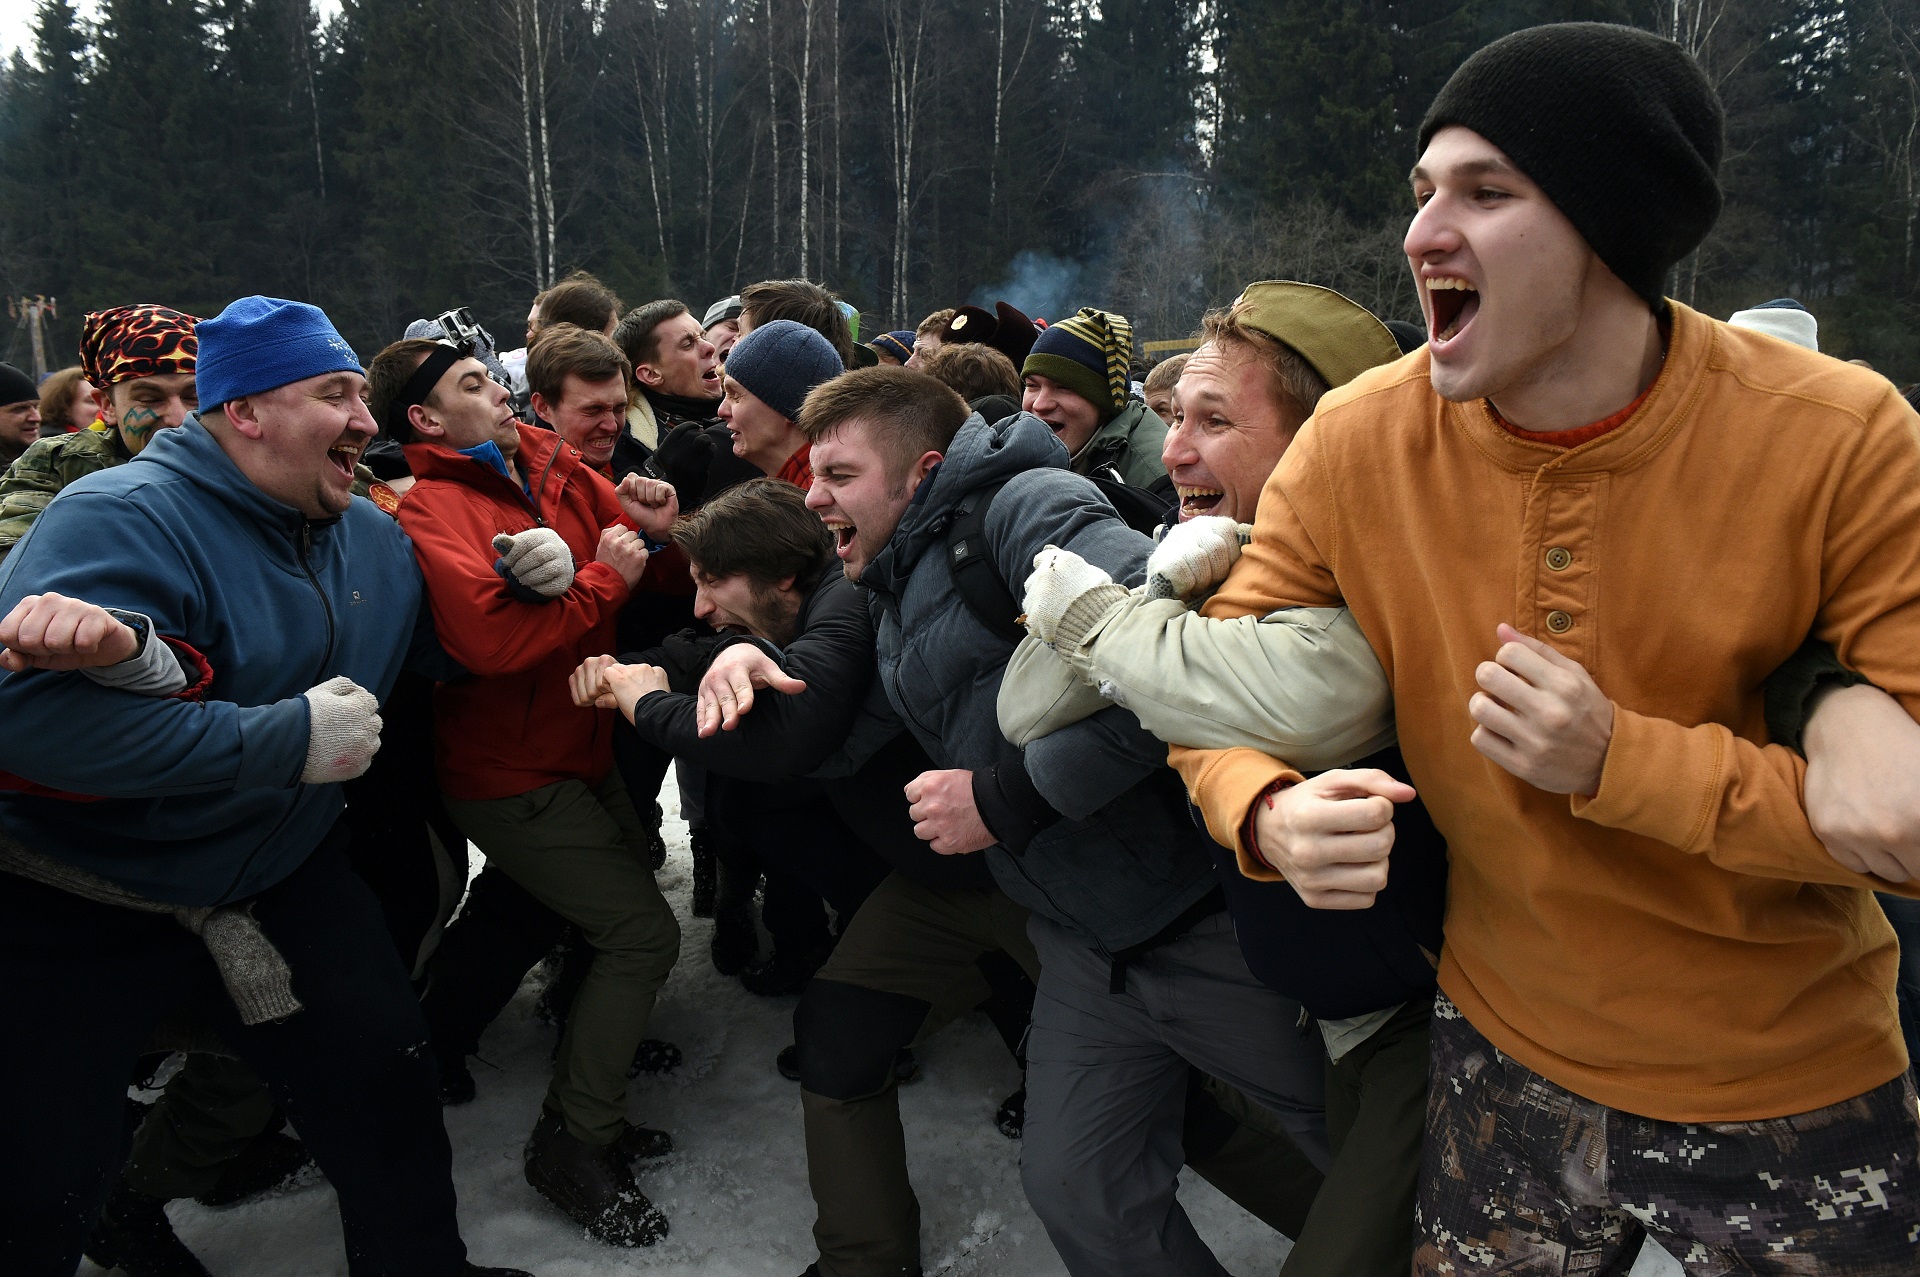 Men take part in a traditional fight close to the village of Abramtsevo, 60 km north of Moscow on March 13, 2016, in celebration of Maslenitsa (Shrovetide), a farewell ceremony to winter. Shrovetide precedes the beginning of Lent, with each day of the week holding its own meaning. Shrove Sunday, also known as the Sunday of Forgiveness, is a day for asking forgiveness for the harm caused to other people intentionally or unintentionally. / AFP PHOTO / VASILY MAXIMOV